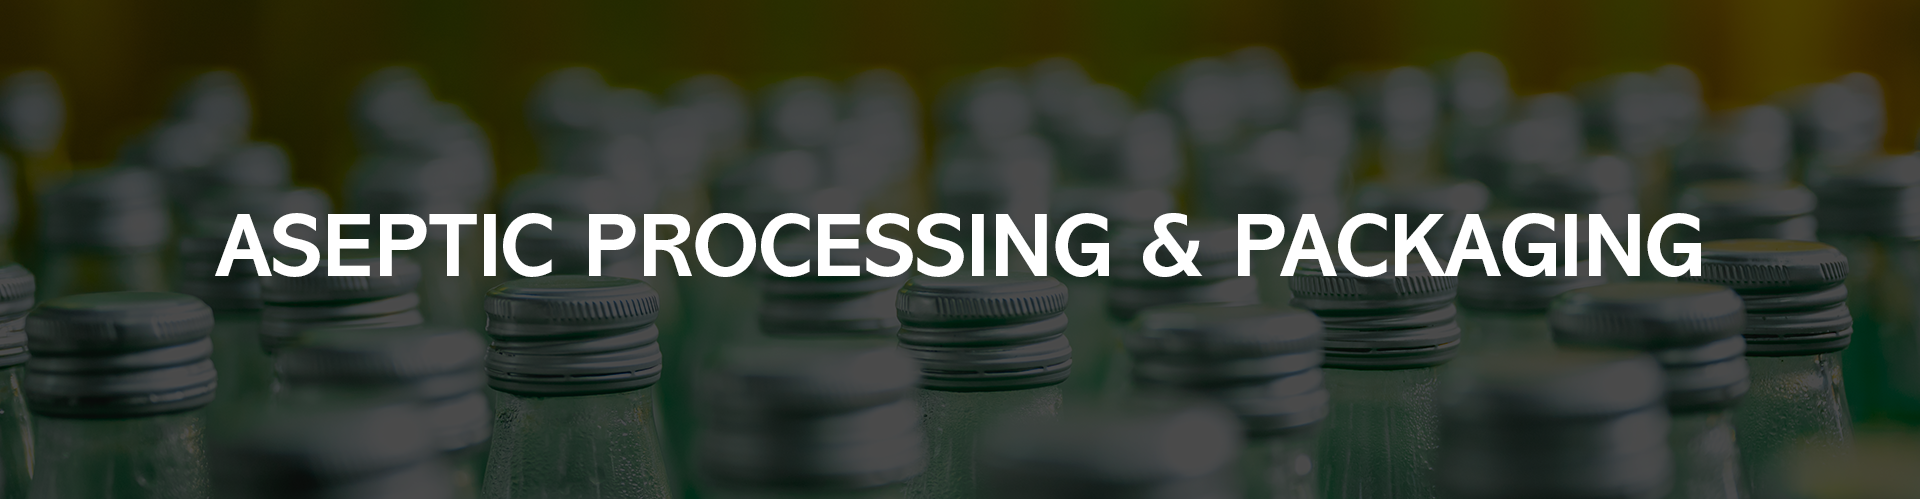 Aseptic Processing & Packaging